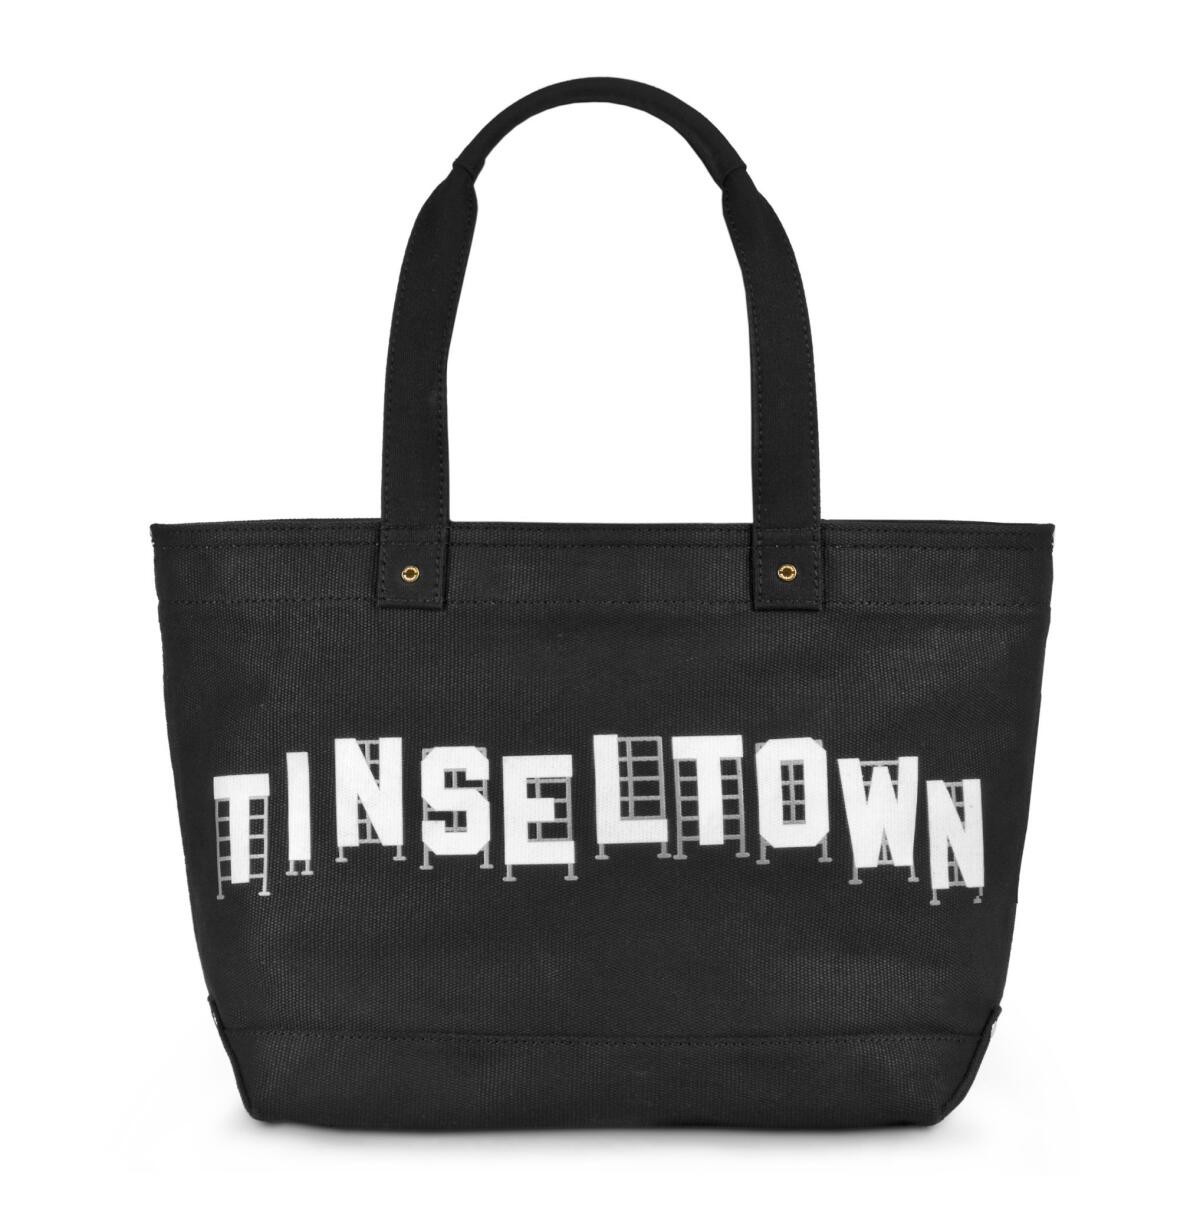 Kate Spade's limited-edition canvas tote bags celebrated the accessory maker's new store openings. Here's the Tinseltown bag, $155.